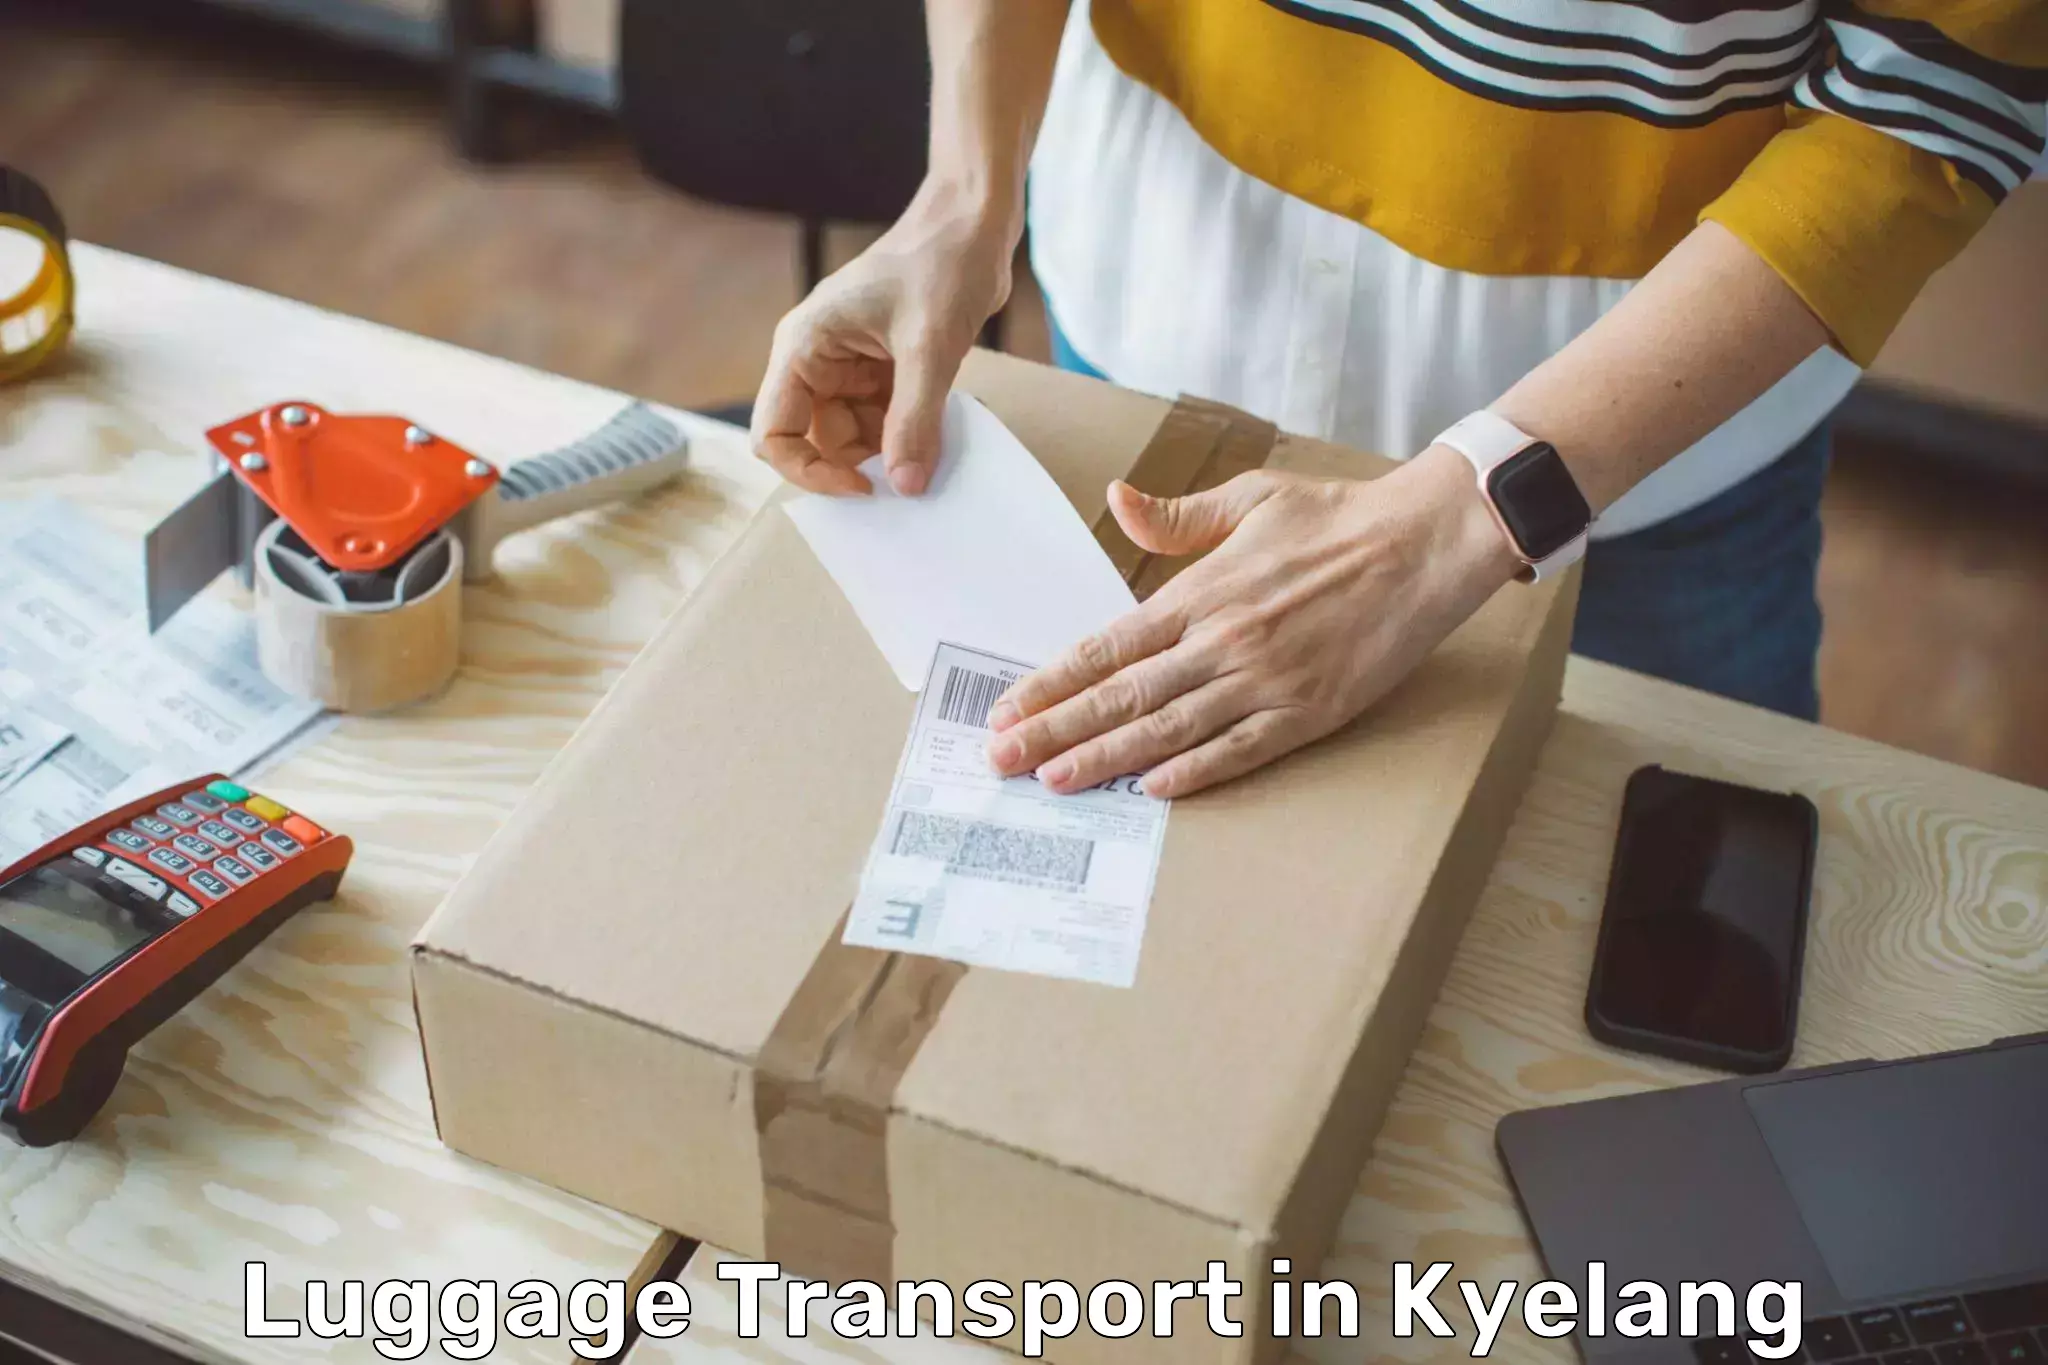 Baggage transport services in Kyelang